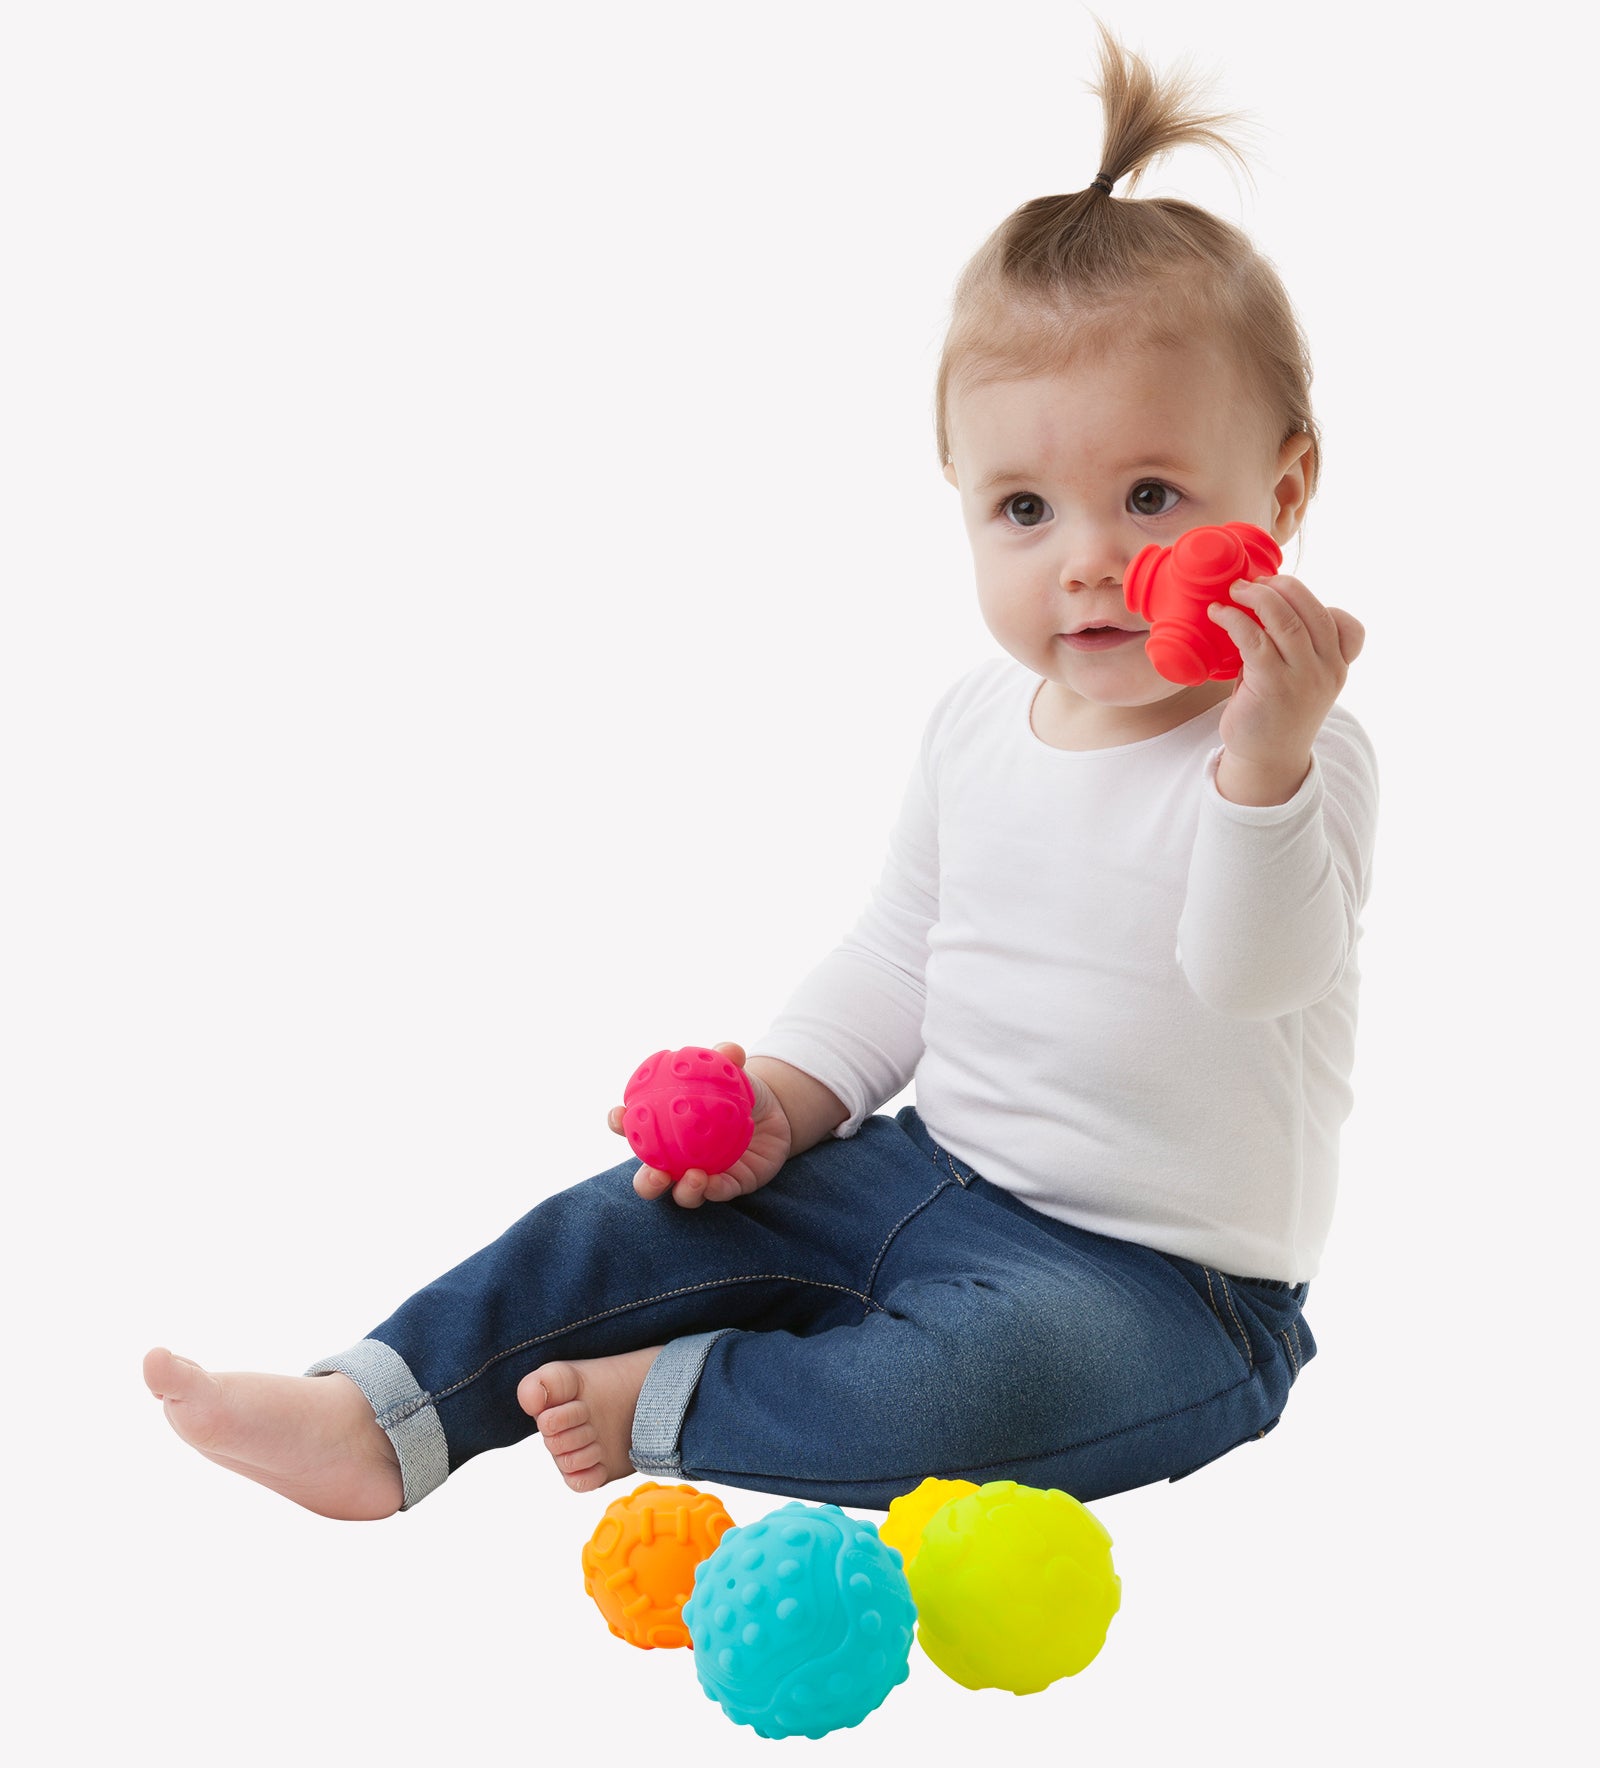 A toddler girl sits down on the floor playing colorful Playgro Textured Ball while holding the red ball